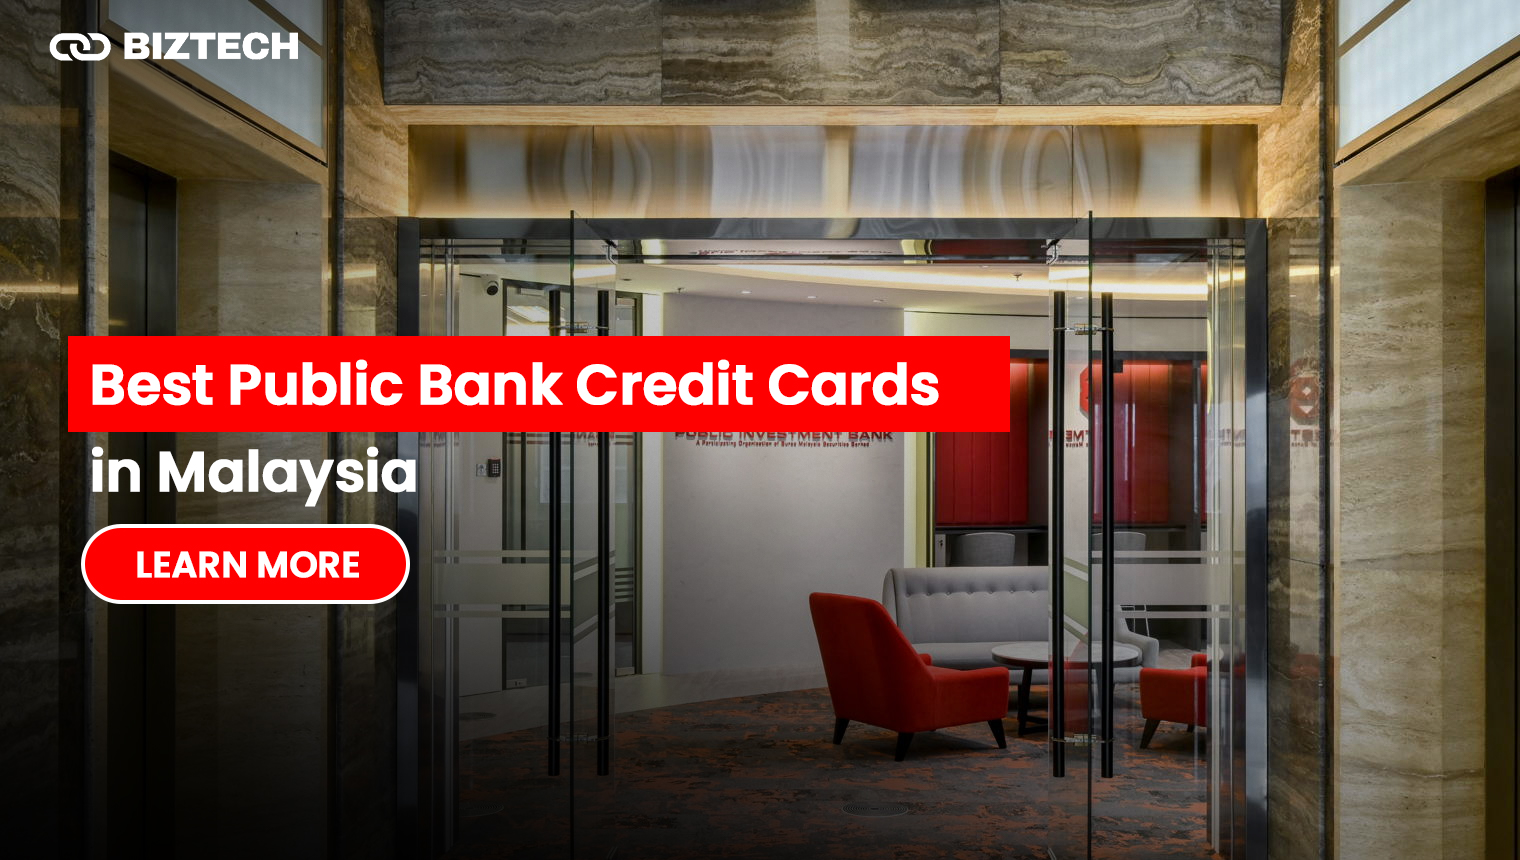 Best Public Bank Credit Cards in Malaysia